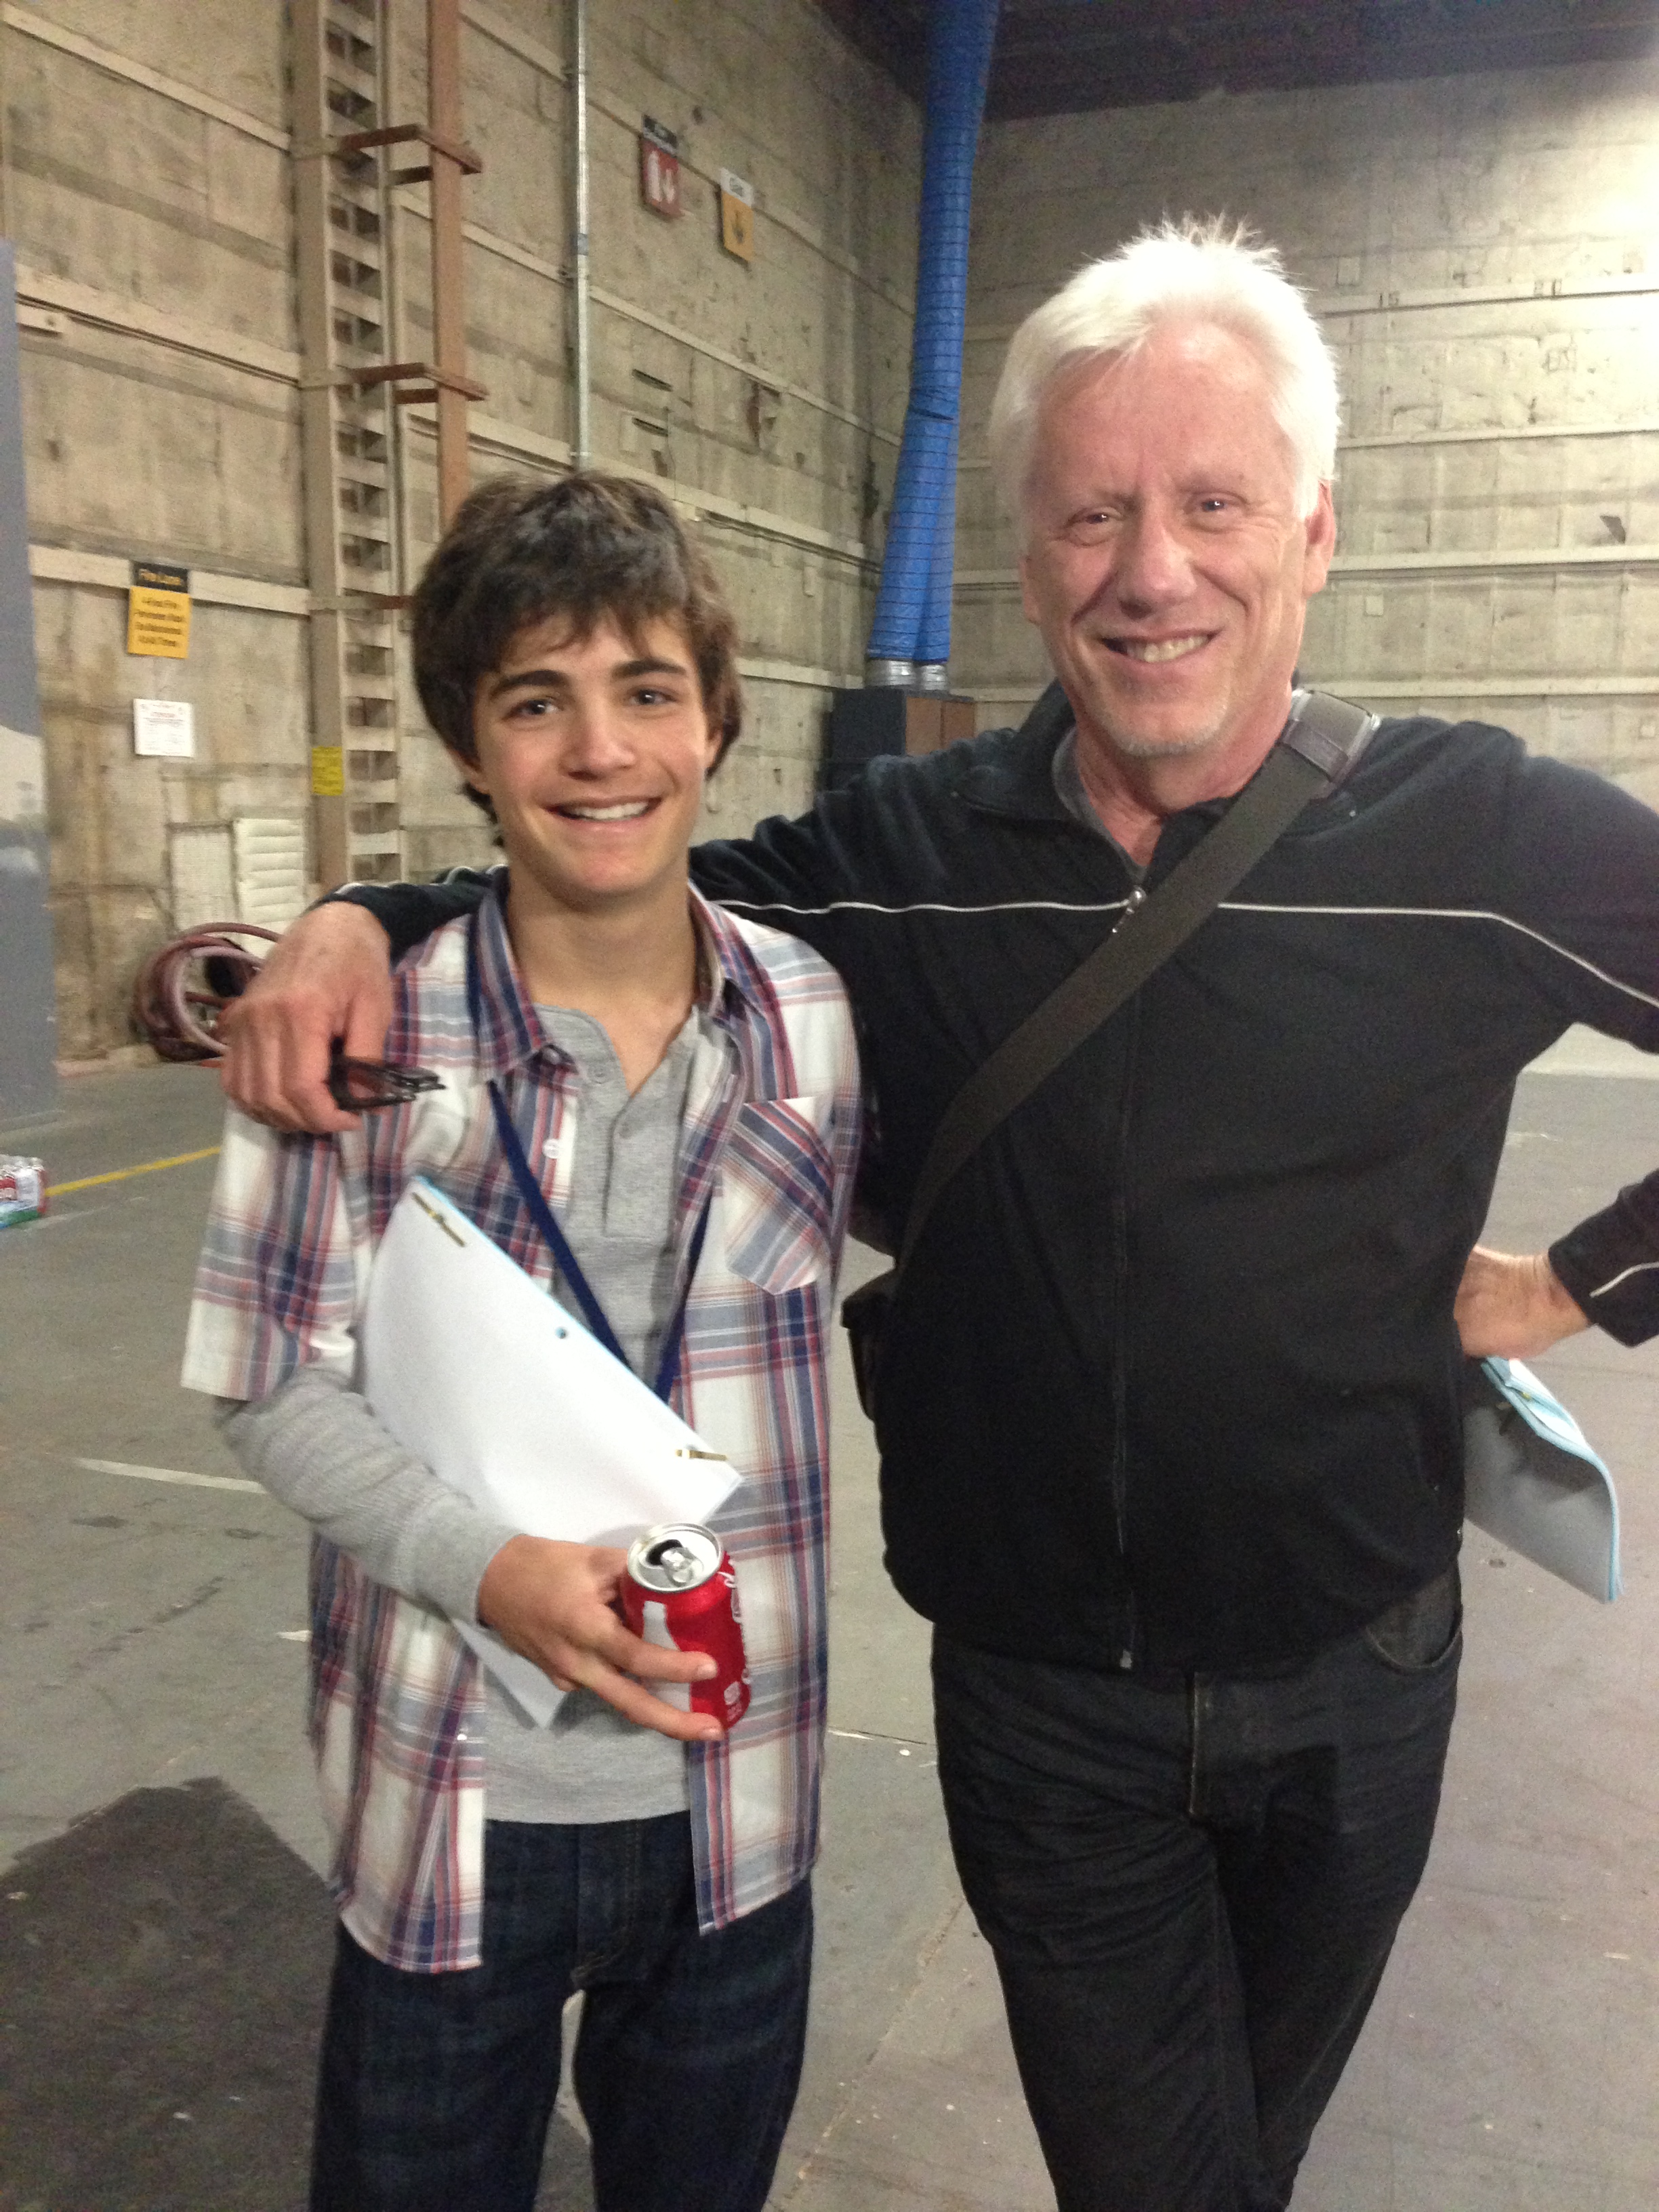 Devon Bagby and James Woods working on Ray Donovan